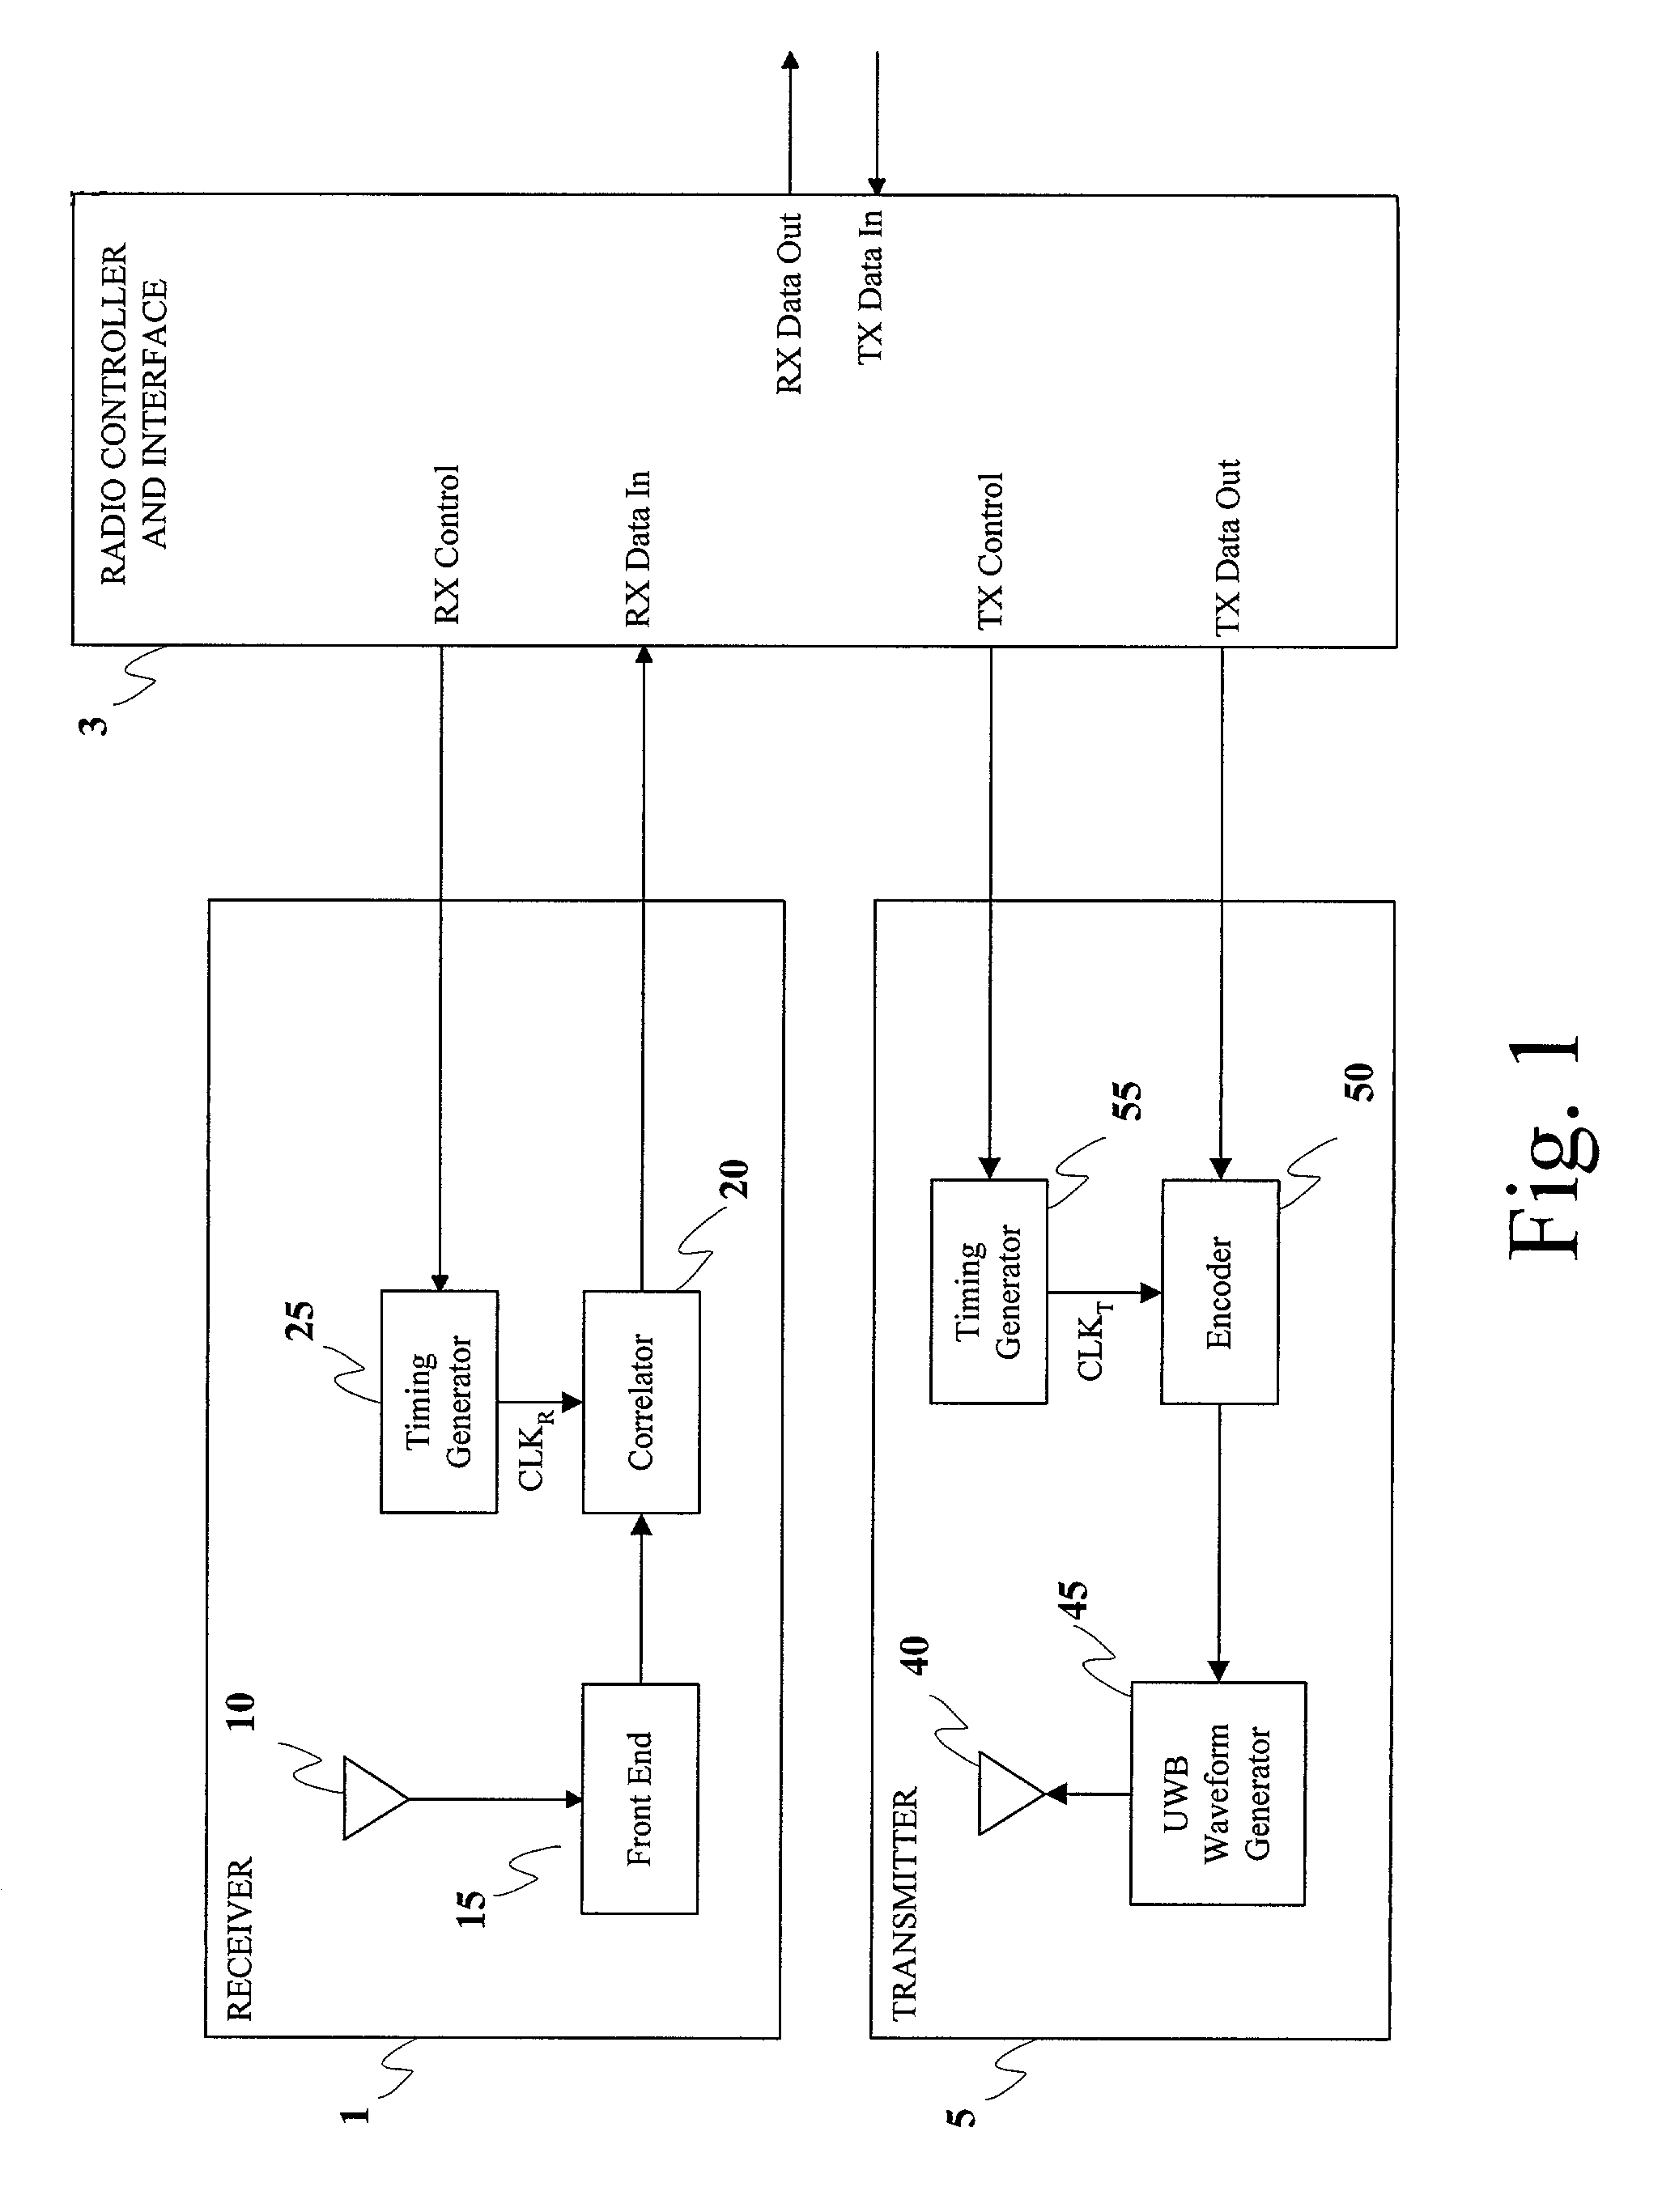 Mode controller for signal acquisition and tracking in an ultra wideband communication system